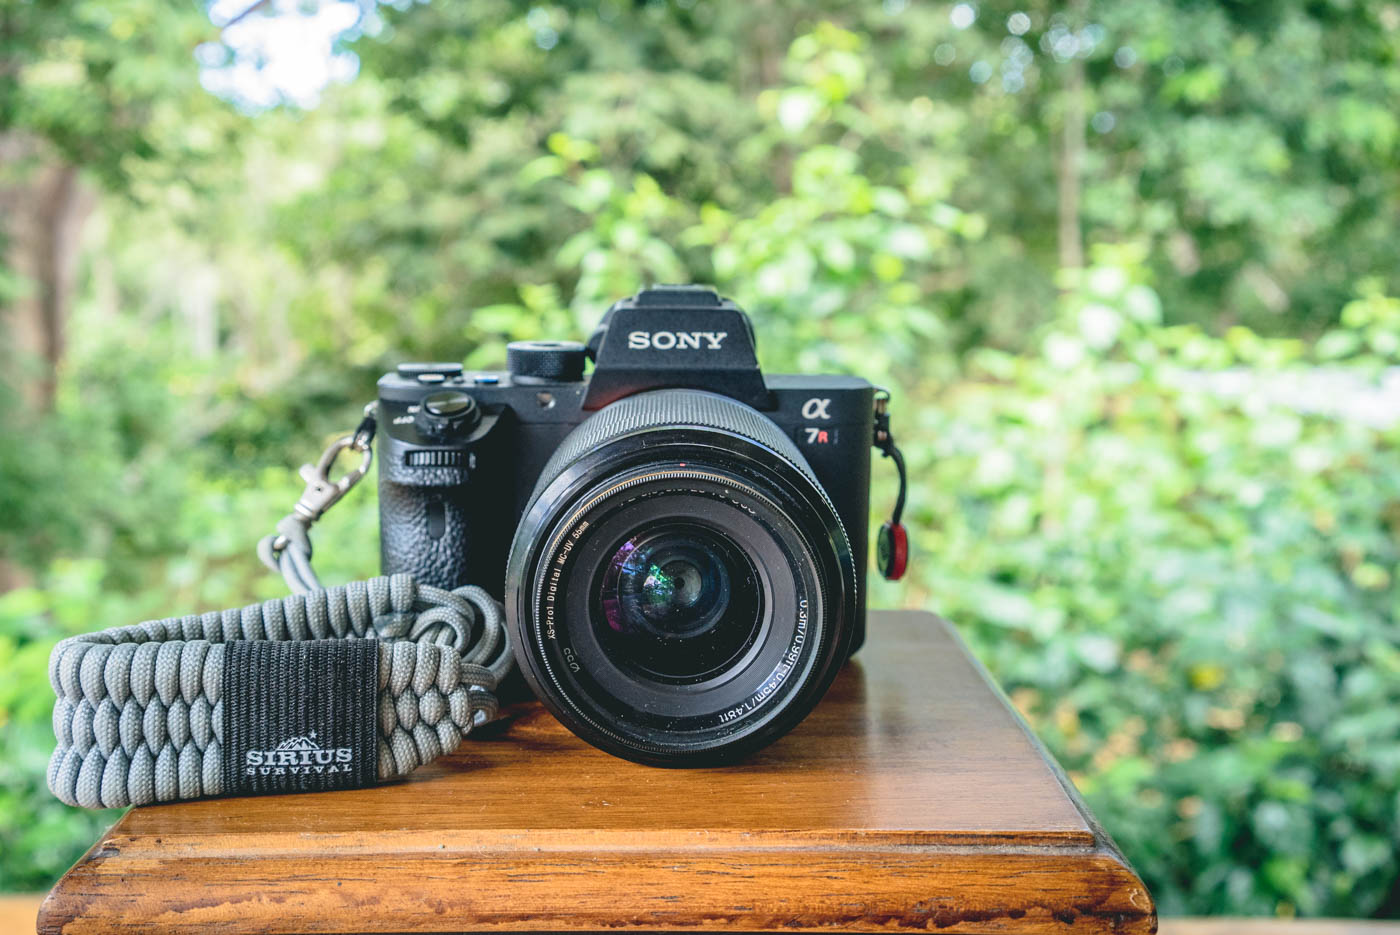 Best travel camera: A7RII featured with 28-70 Sony lens